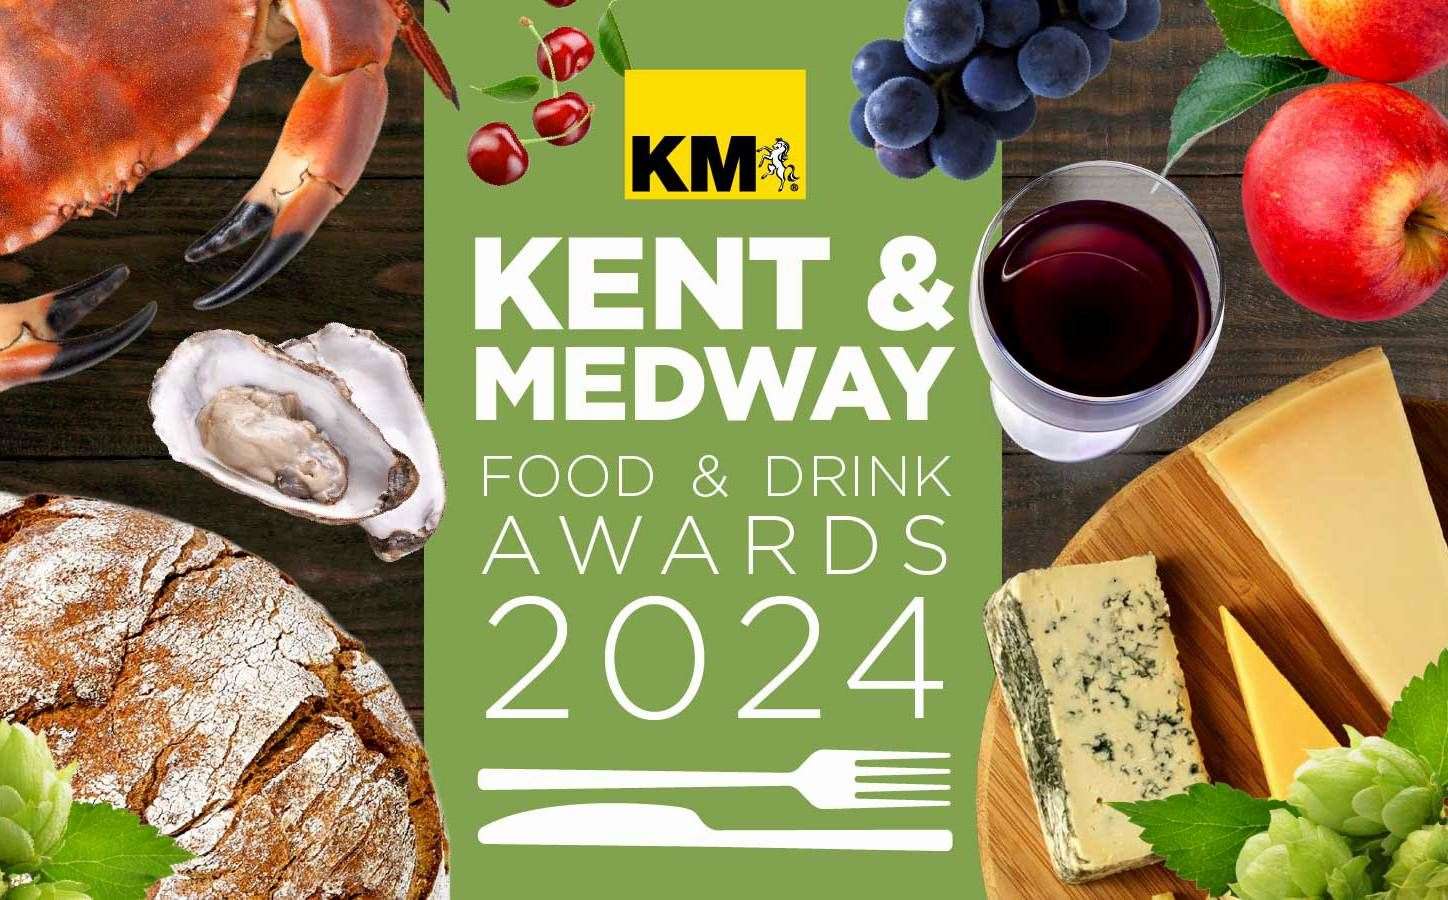 We can now reveal the shortlists for this year’s Kent & Medway Food & Drink Awards – including Tearoom/Coffee Shop of the Year